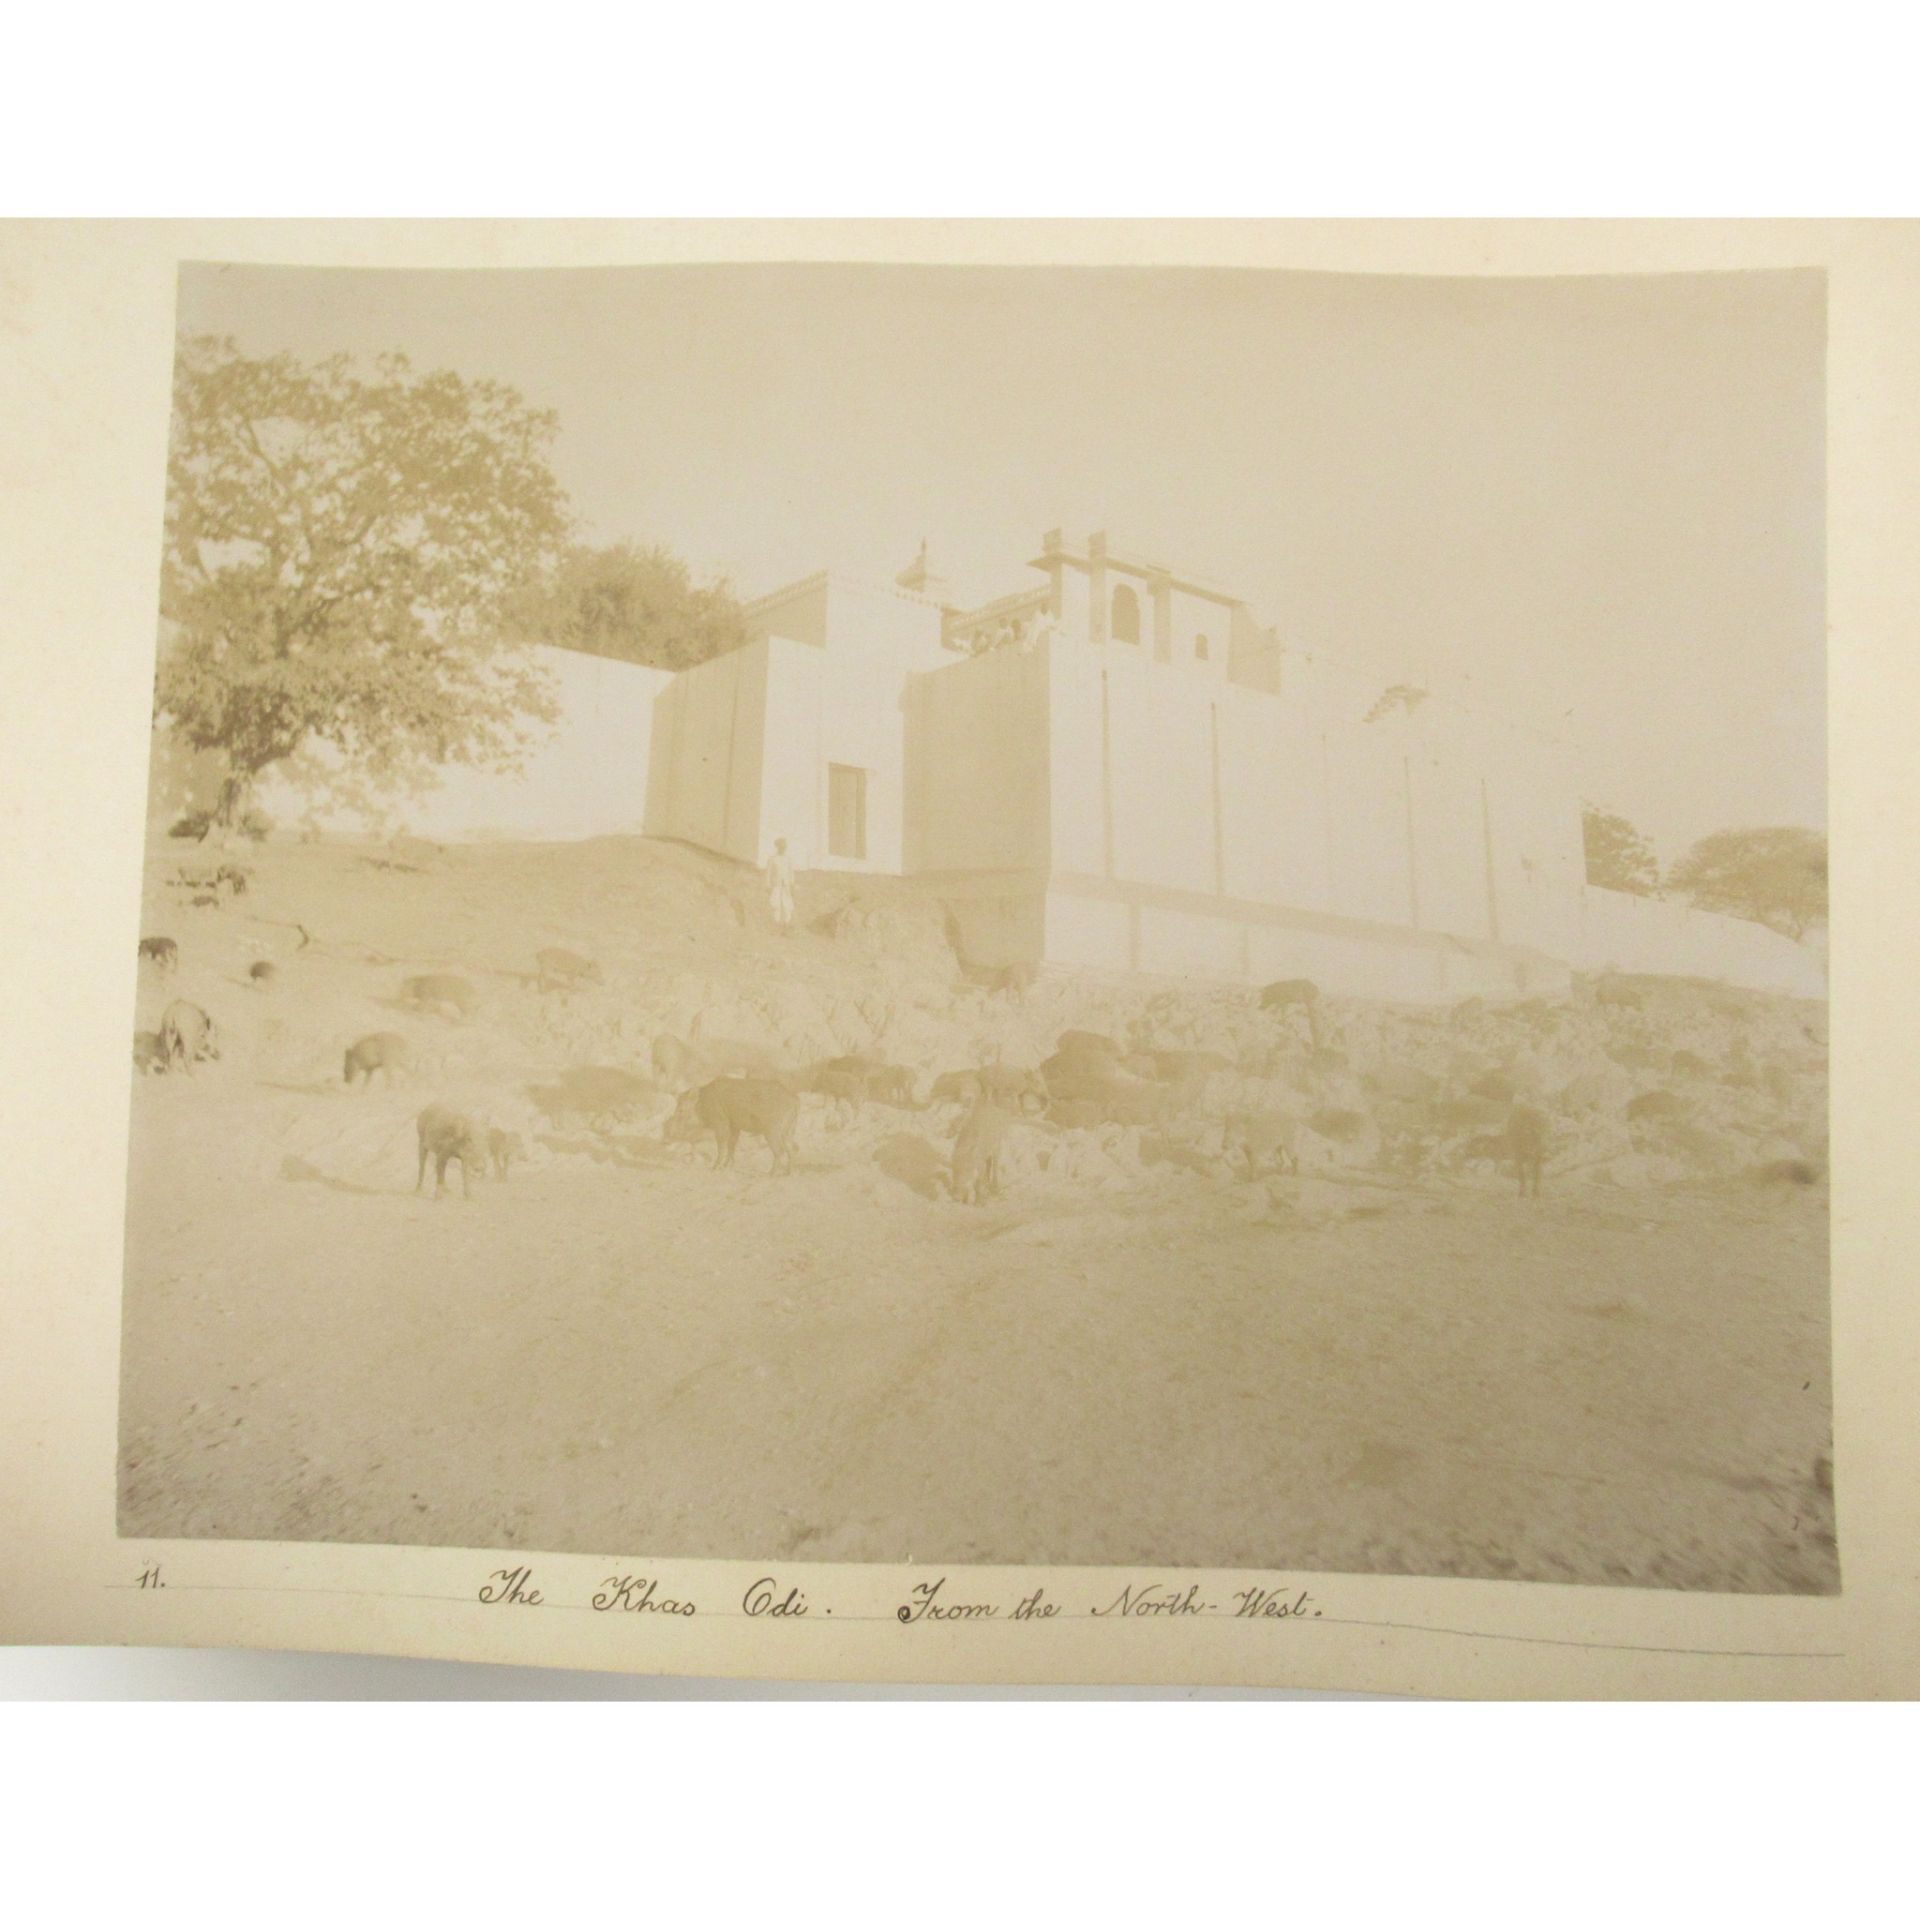 India: a photograph album Photographs of Rajasthan by Mohan Lal of Udaipur, late 19th century - Image 6 of 23